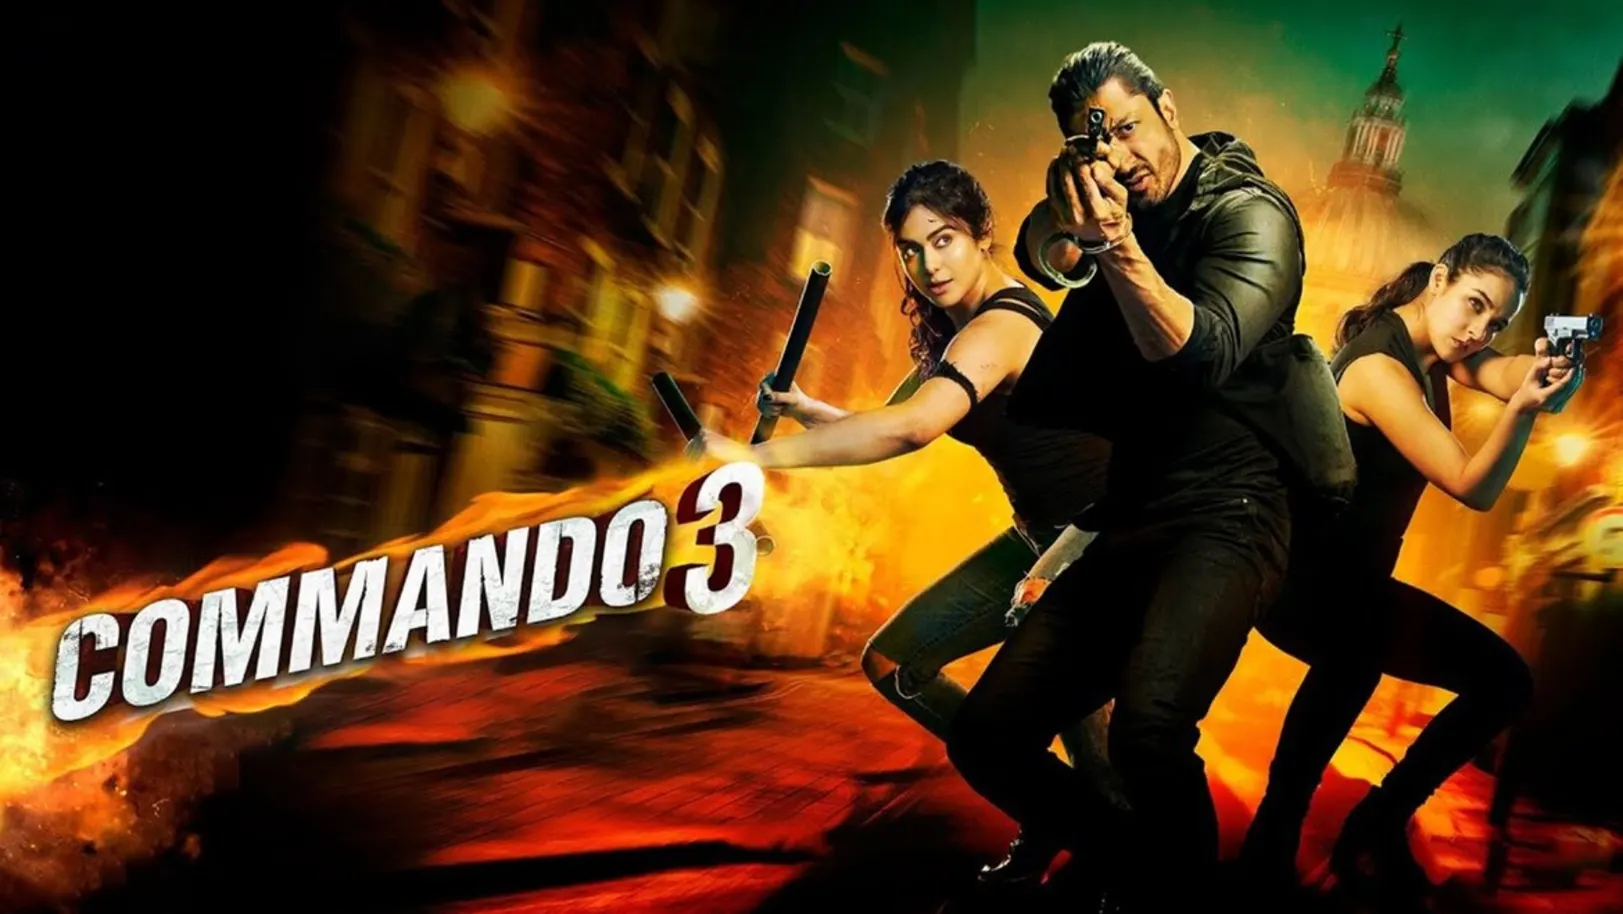 Commando 3 Streaming Now On &Pictures